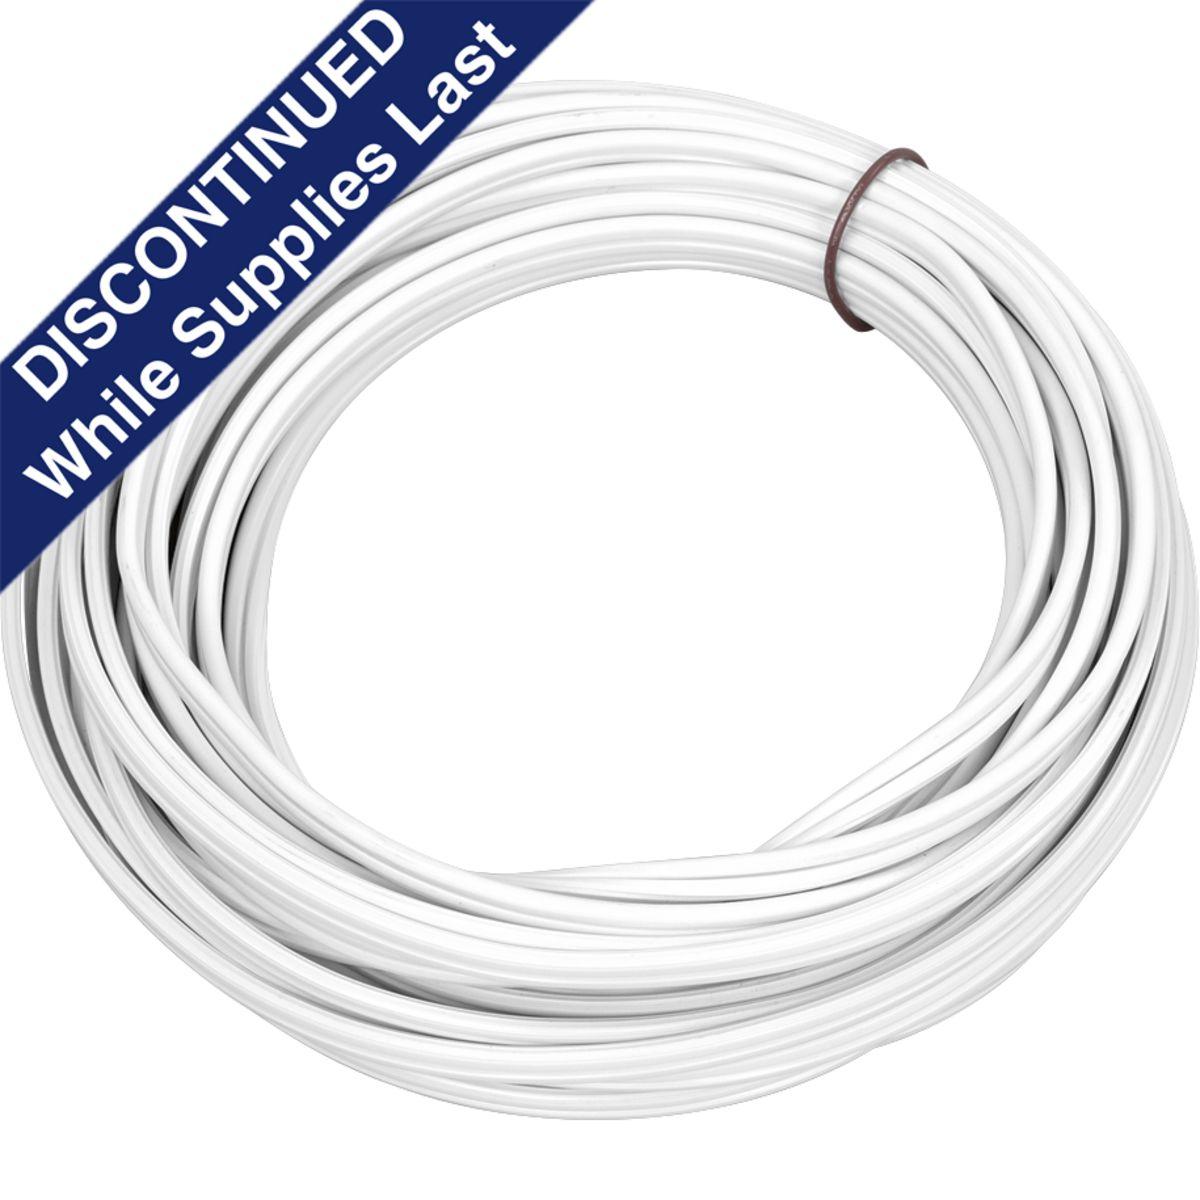 Hubbell P860030-028 100 feet of SPT-2 wire can be used for direct wiring of the Hide-a-Lite V LED Puck P700005 series. The wiring provides the length needed to daisy chain the LED pucks together. This wire is rated so it can be exposed under the cabinet and is safe to touch.